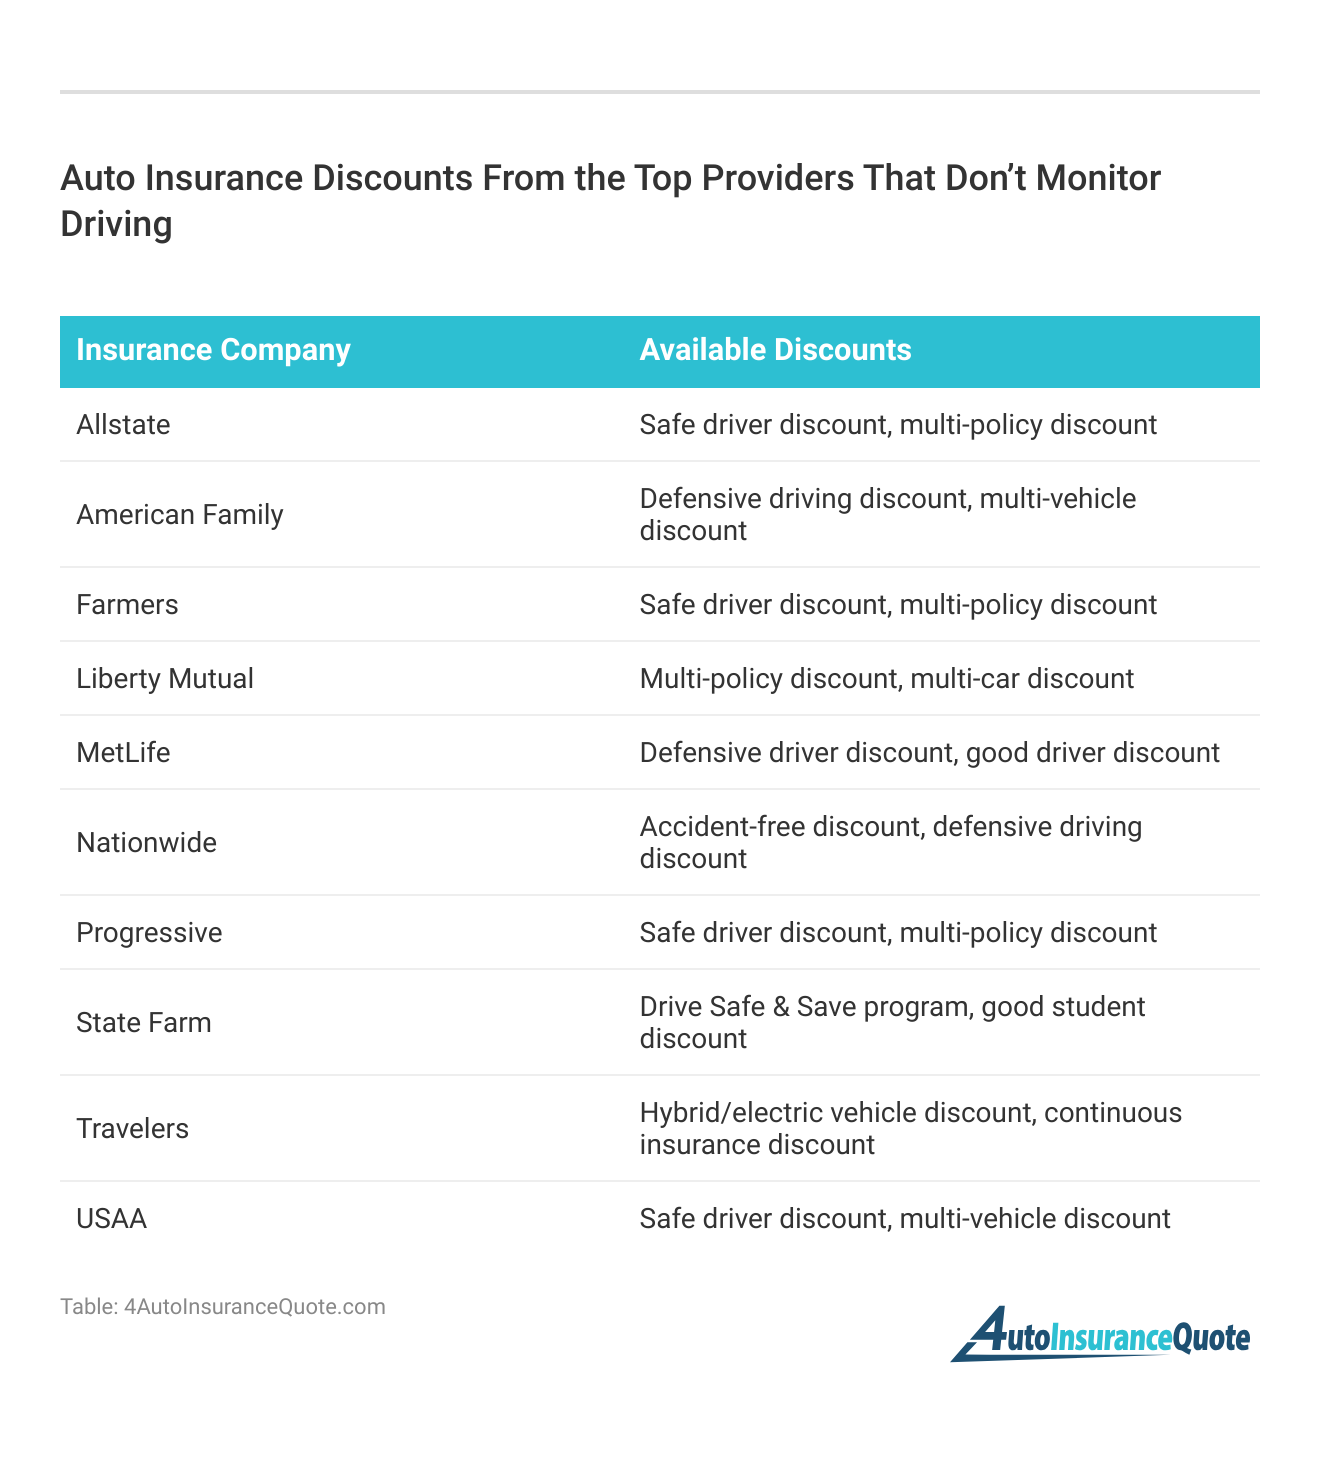 <h3>Auto Insurance Discounts From the Top Providers That Don’t Monitor Driving</h3>